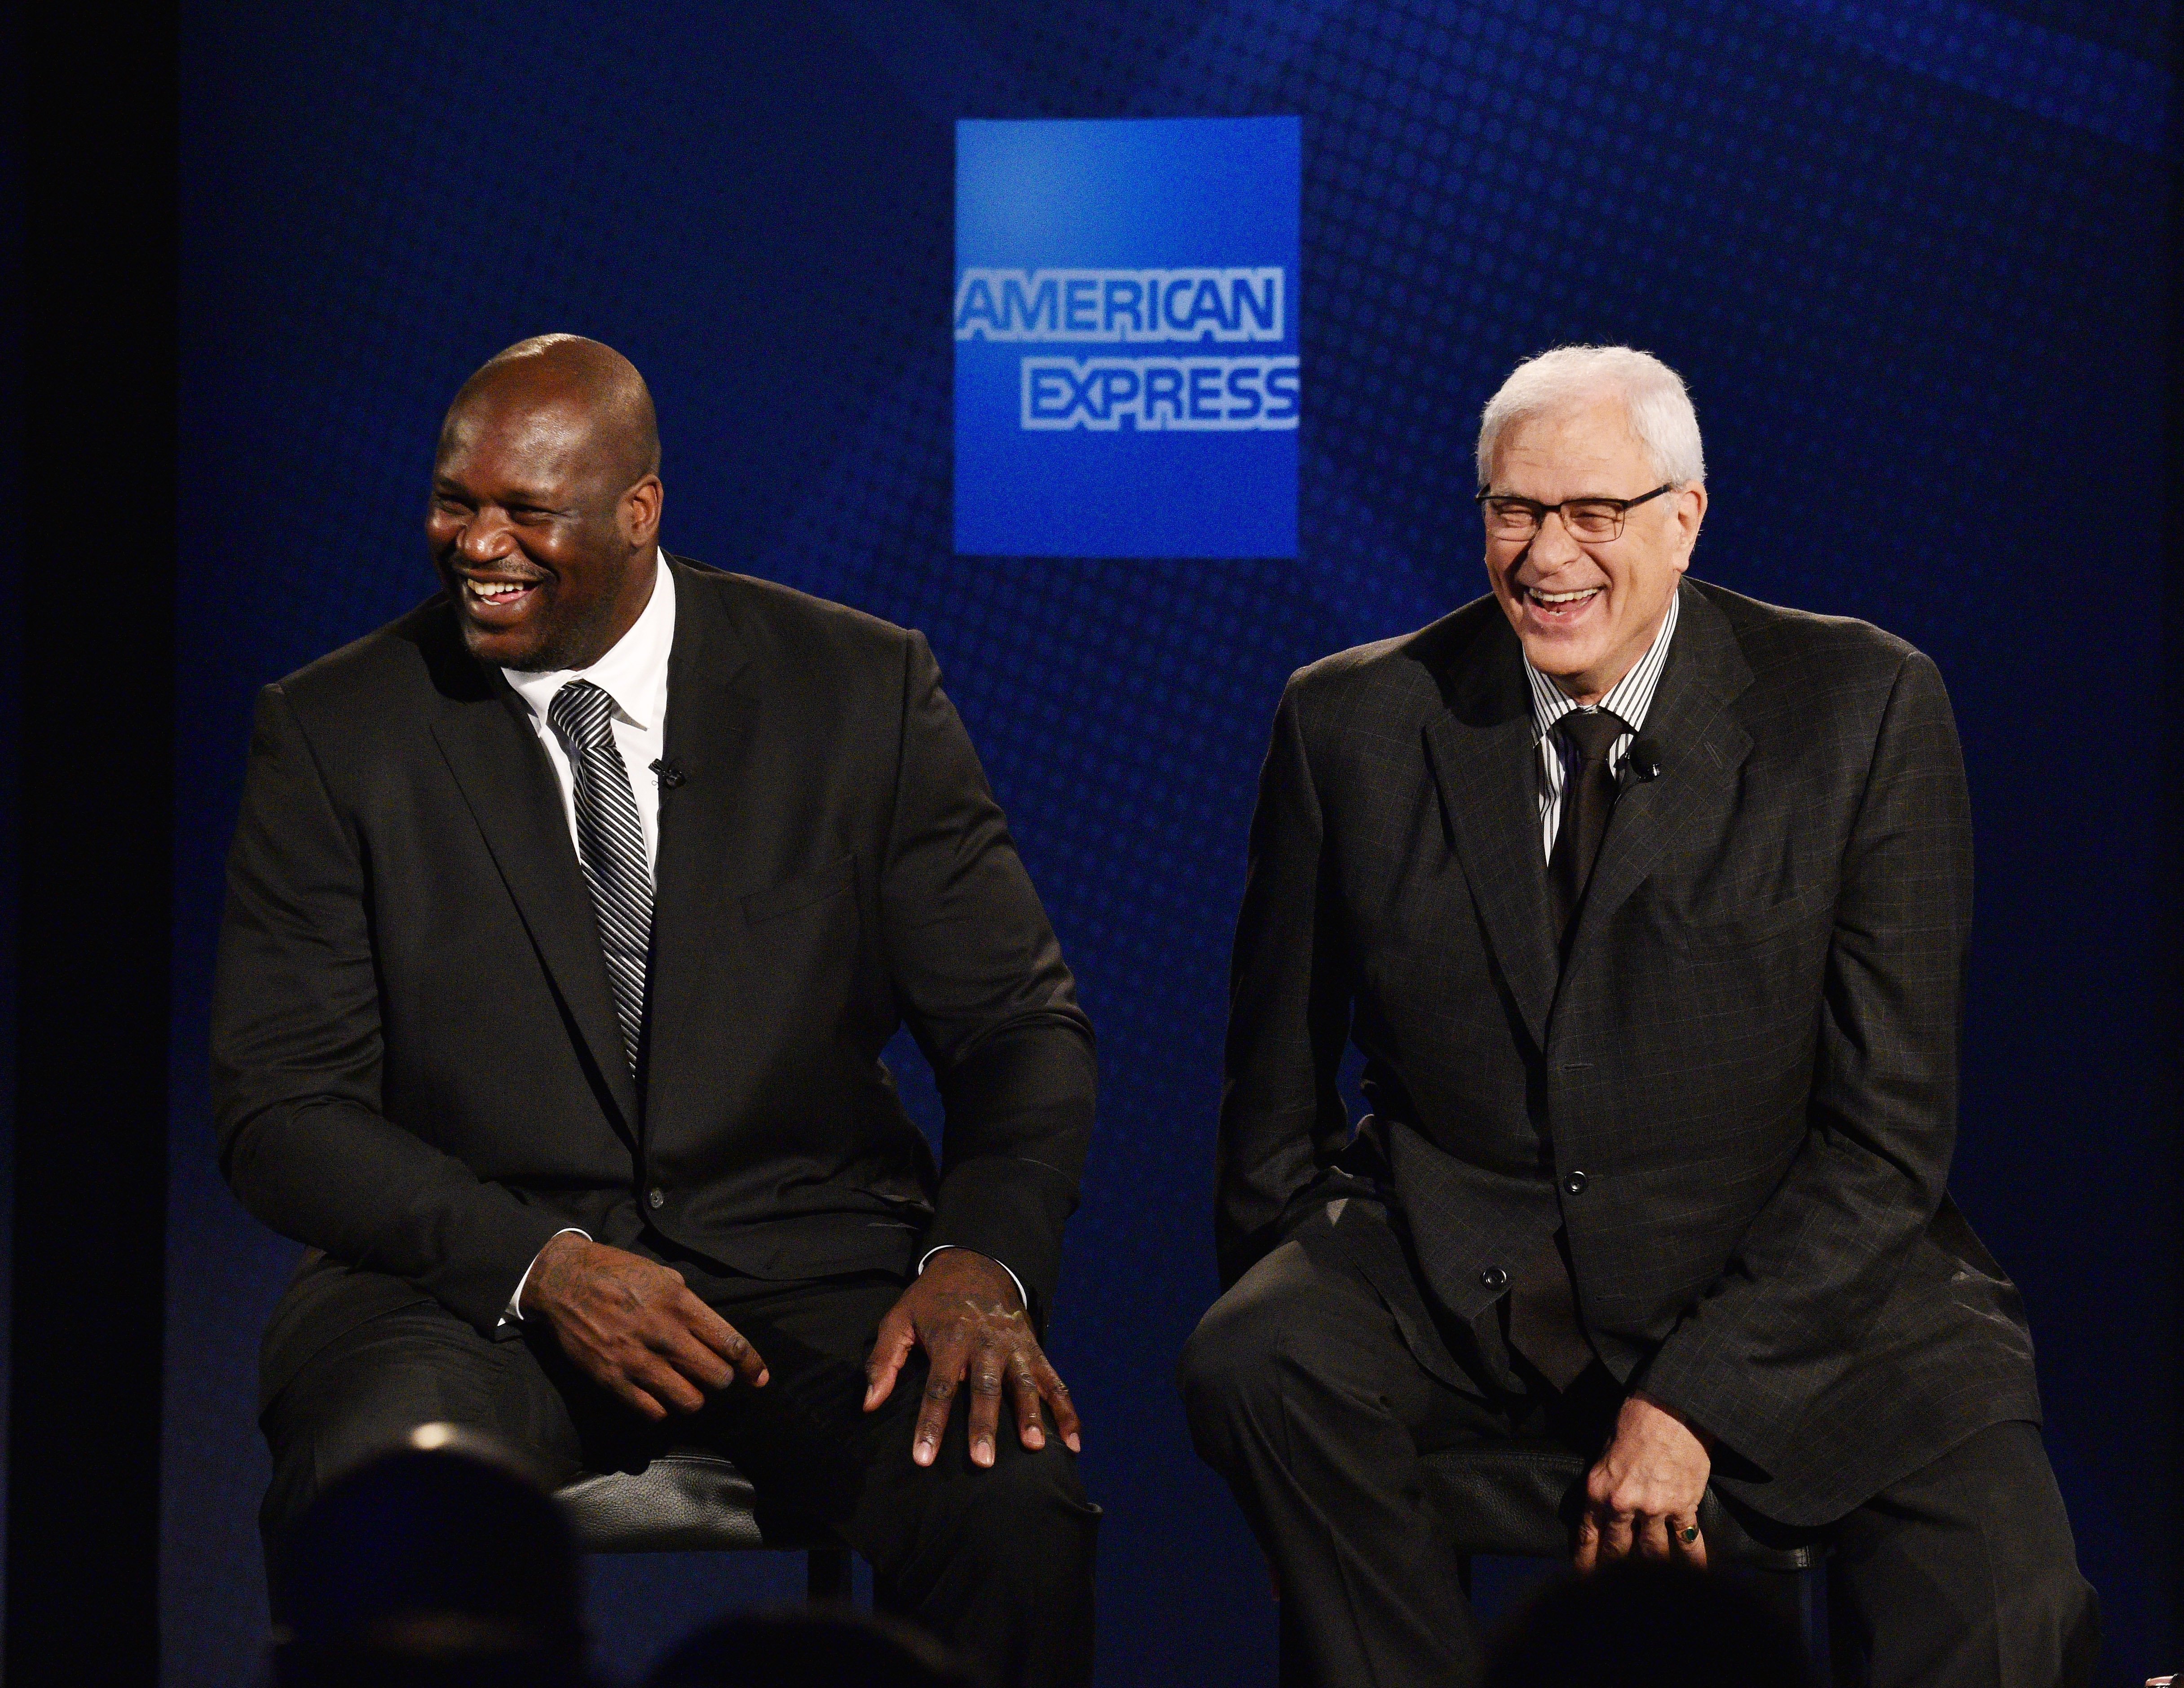 Shaquille O'Neal and Phil Jackson at the Altman Building on June 6, 2016 | Photo: Getty Images